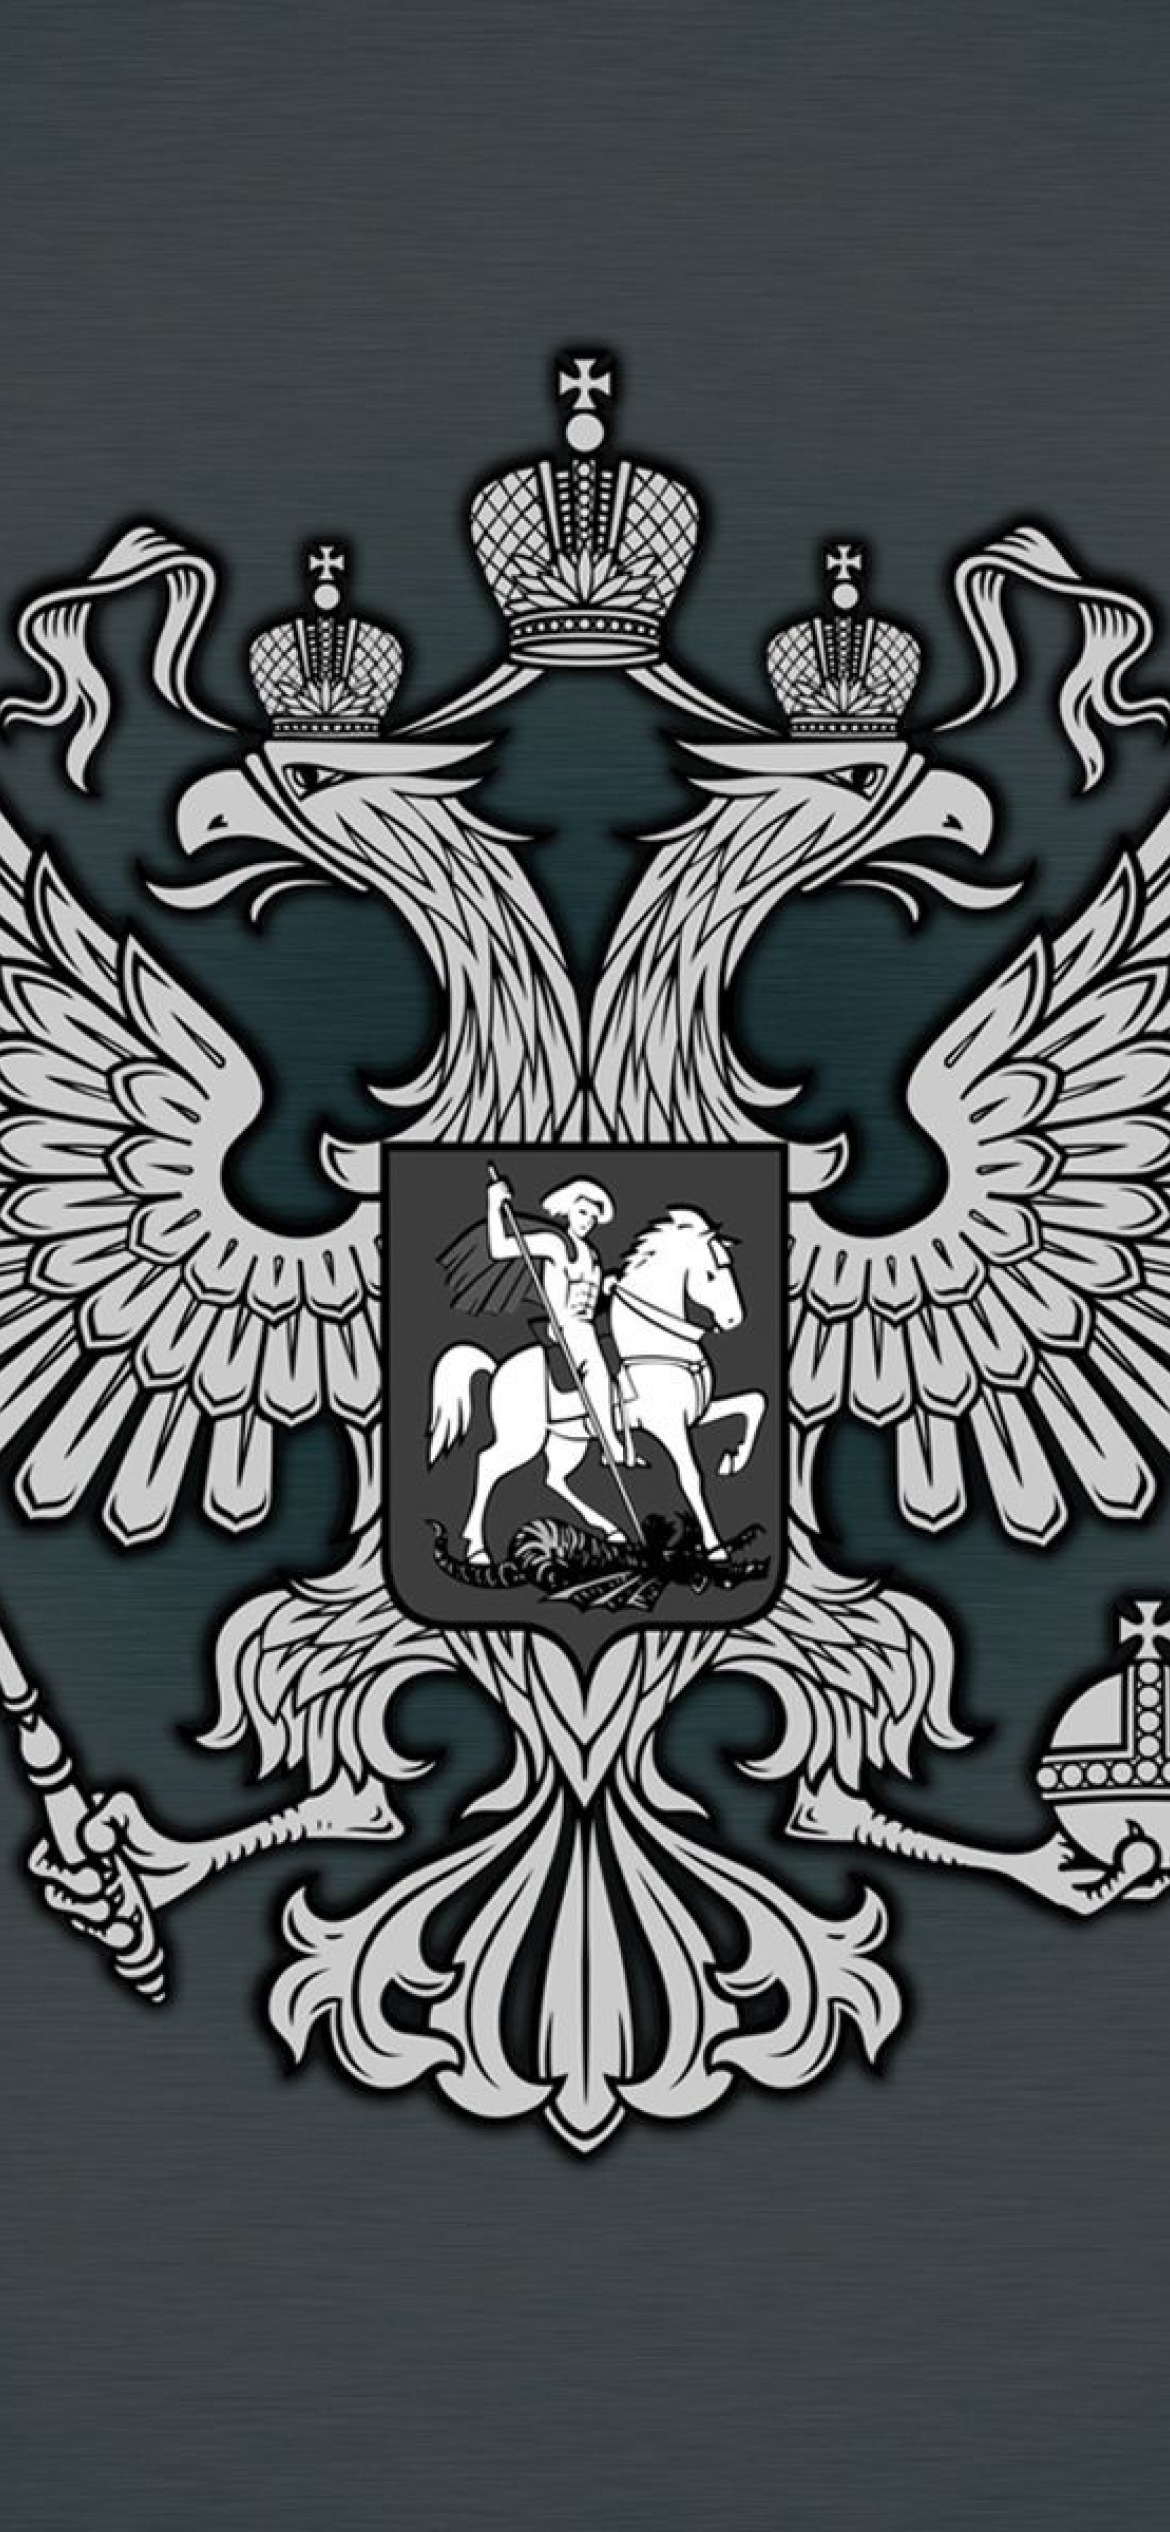 Das Coat of arms of Russia Wallpaper 1170x2532